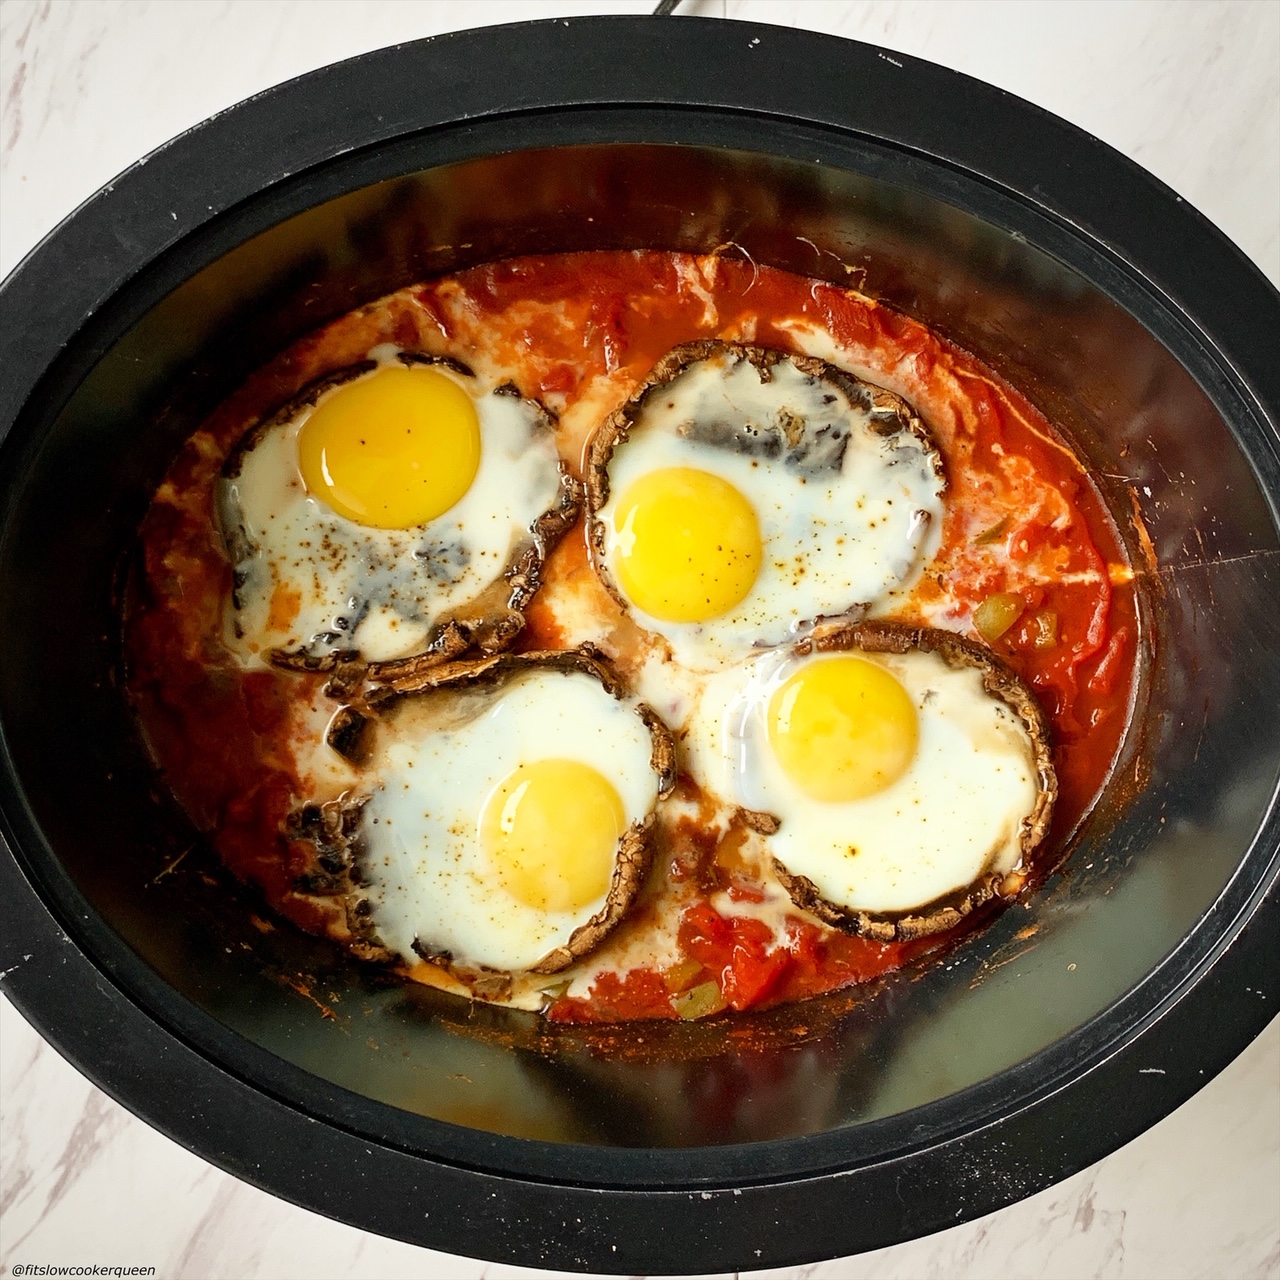 cooked eggs added on top of cooked portobello mushrooms in the slow cooker